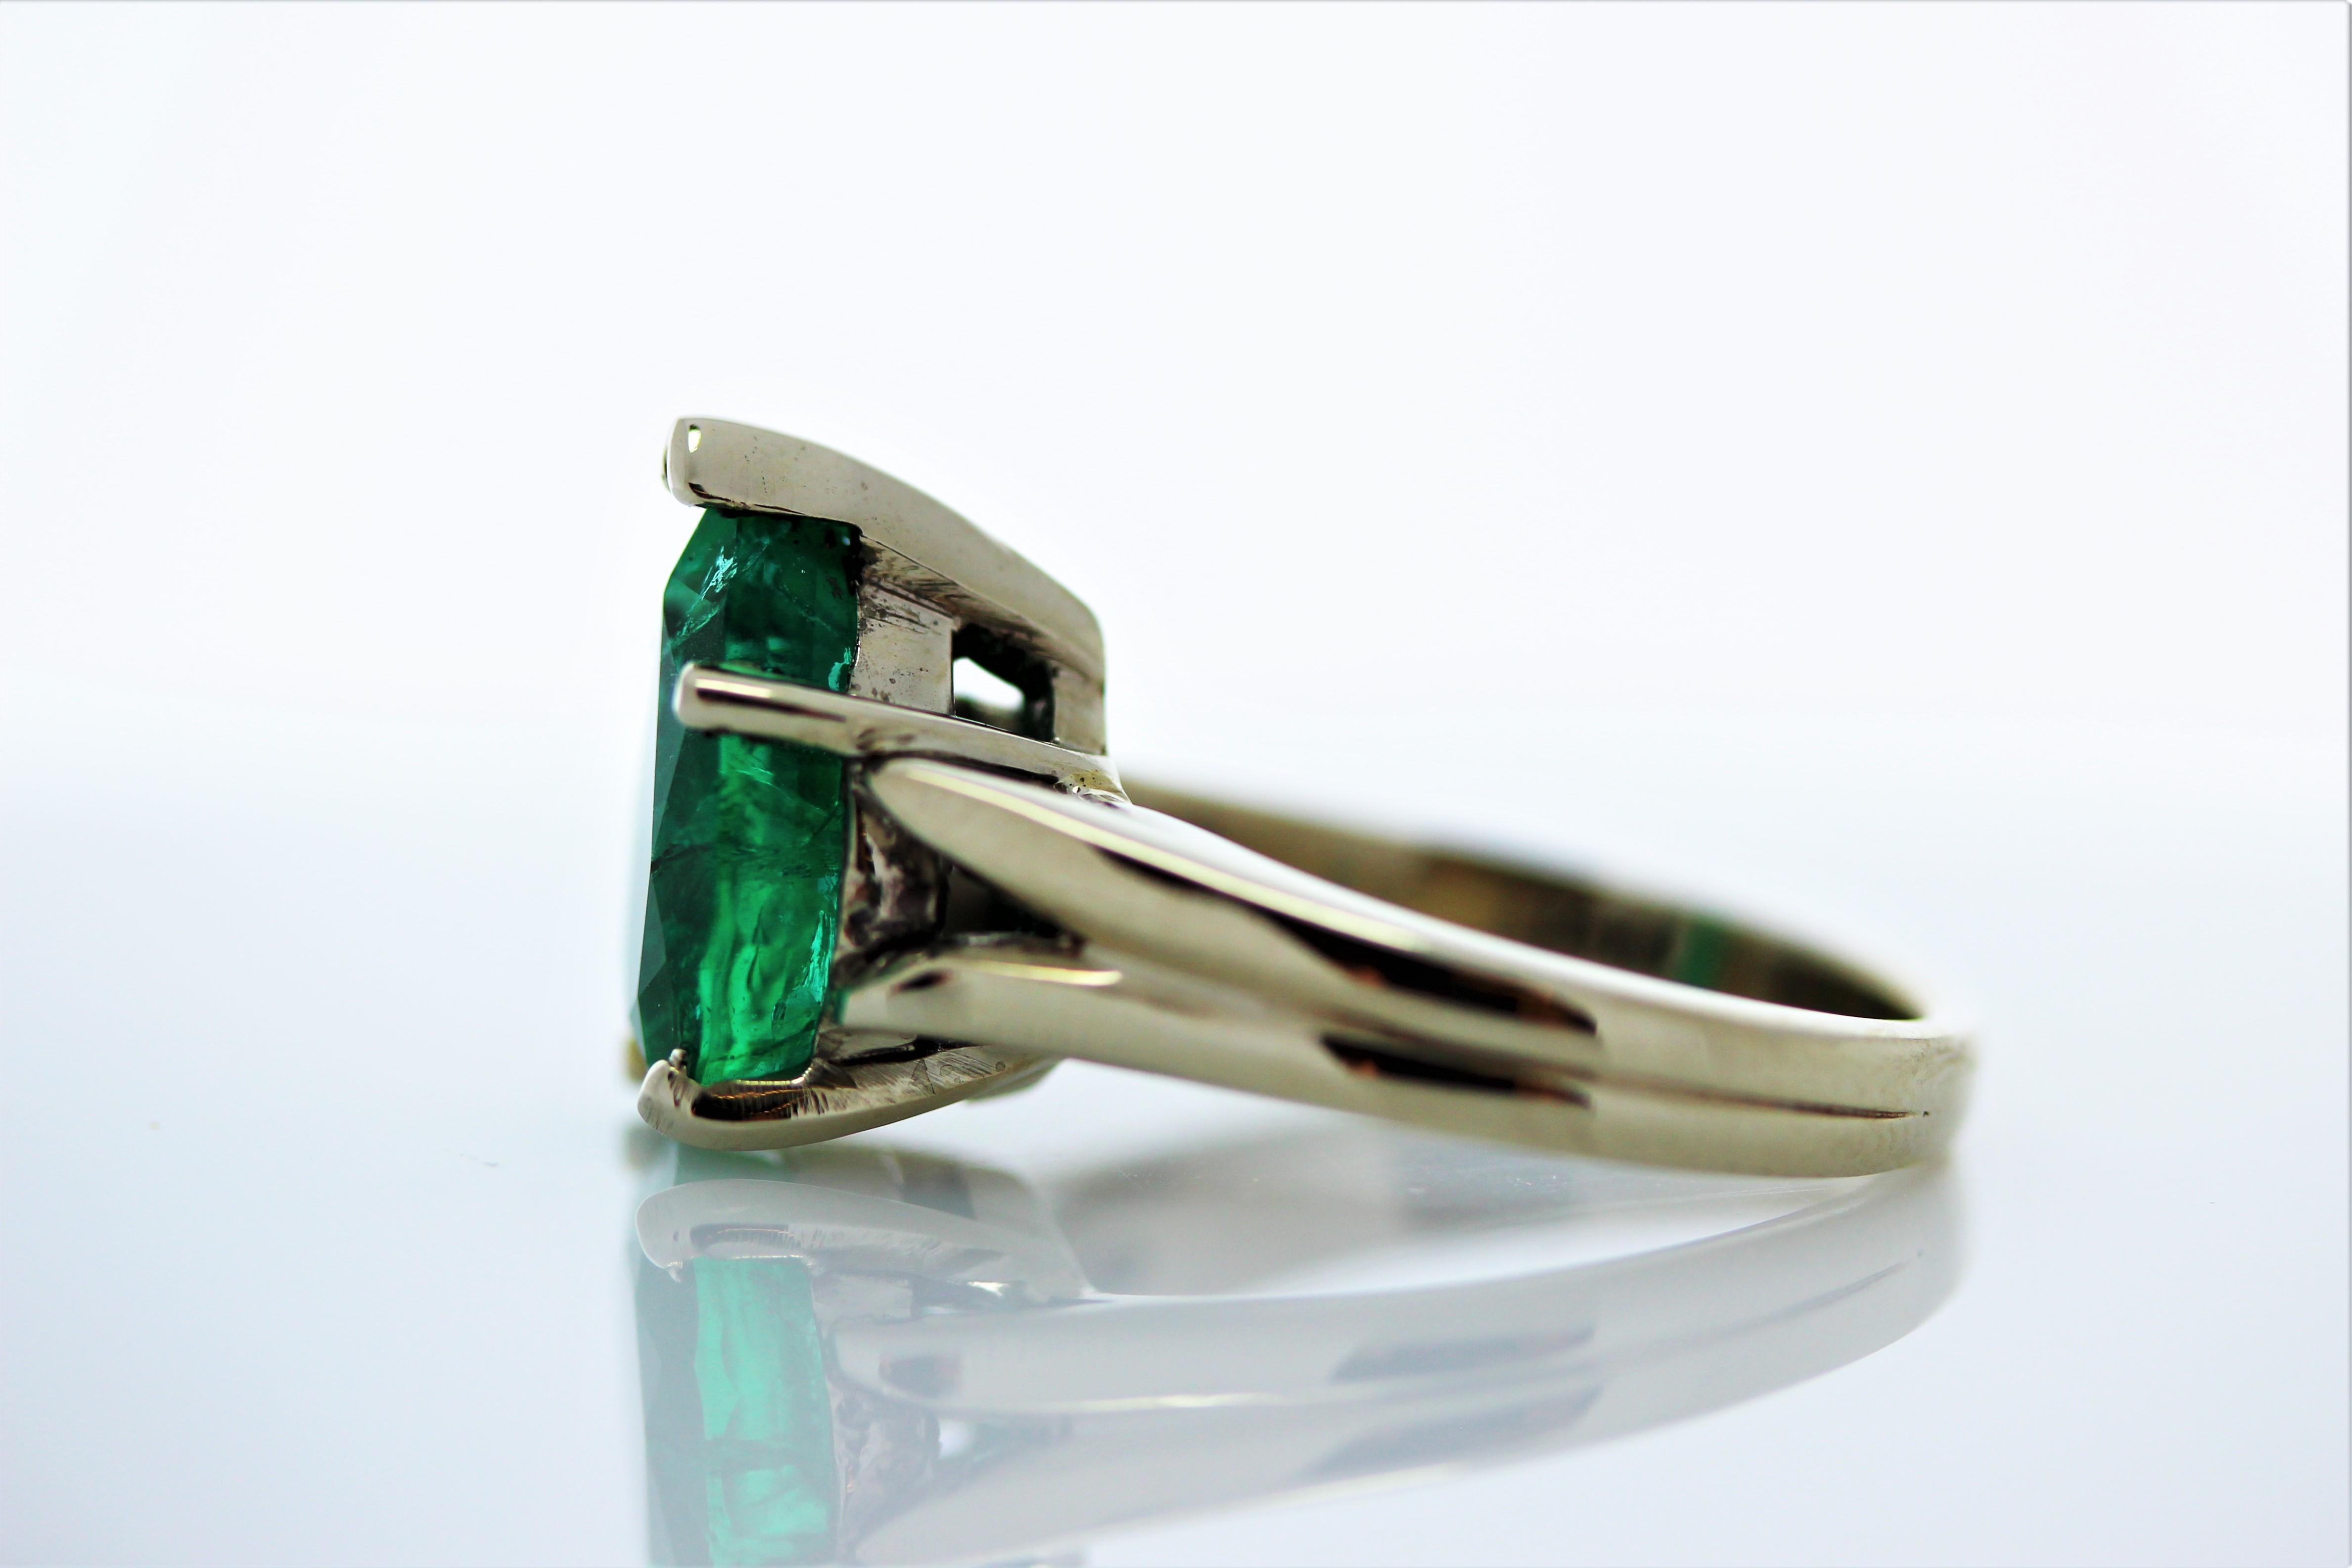 Would you look at this beauty! Simple in design, but there is nothing ordinary about the gorgeous color of this breathtaking green emerald ring. This stunning piece features a pear shape cut 3.90 carats emerald, set into a four-prong. The emerald is